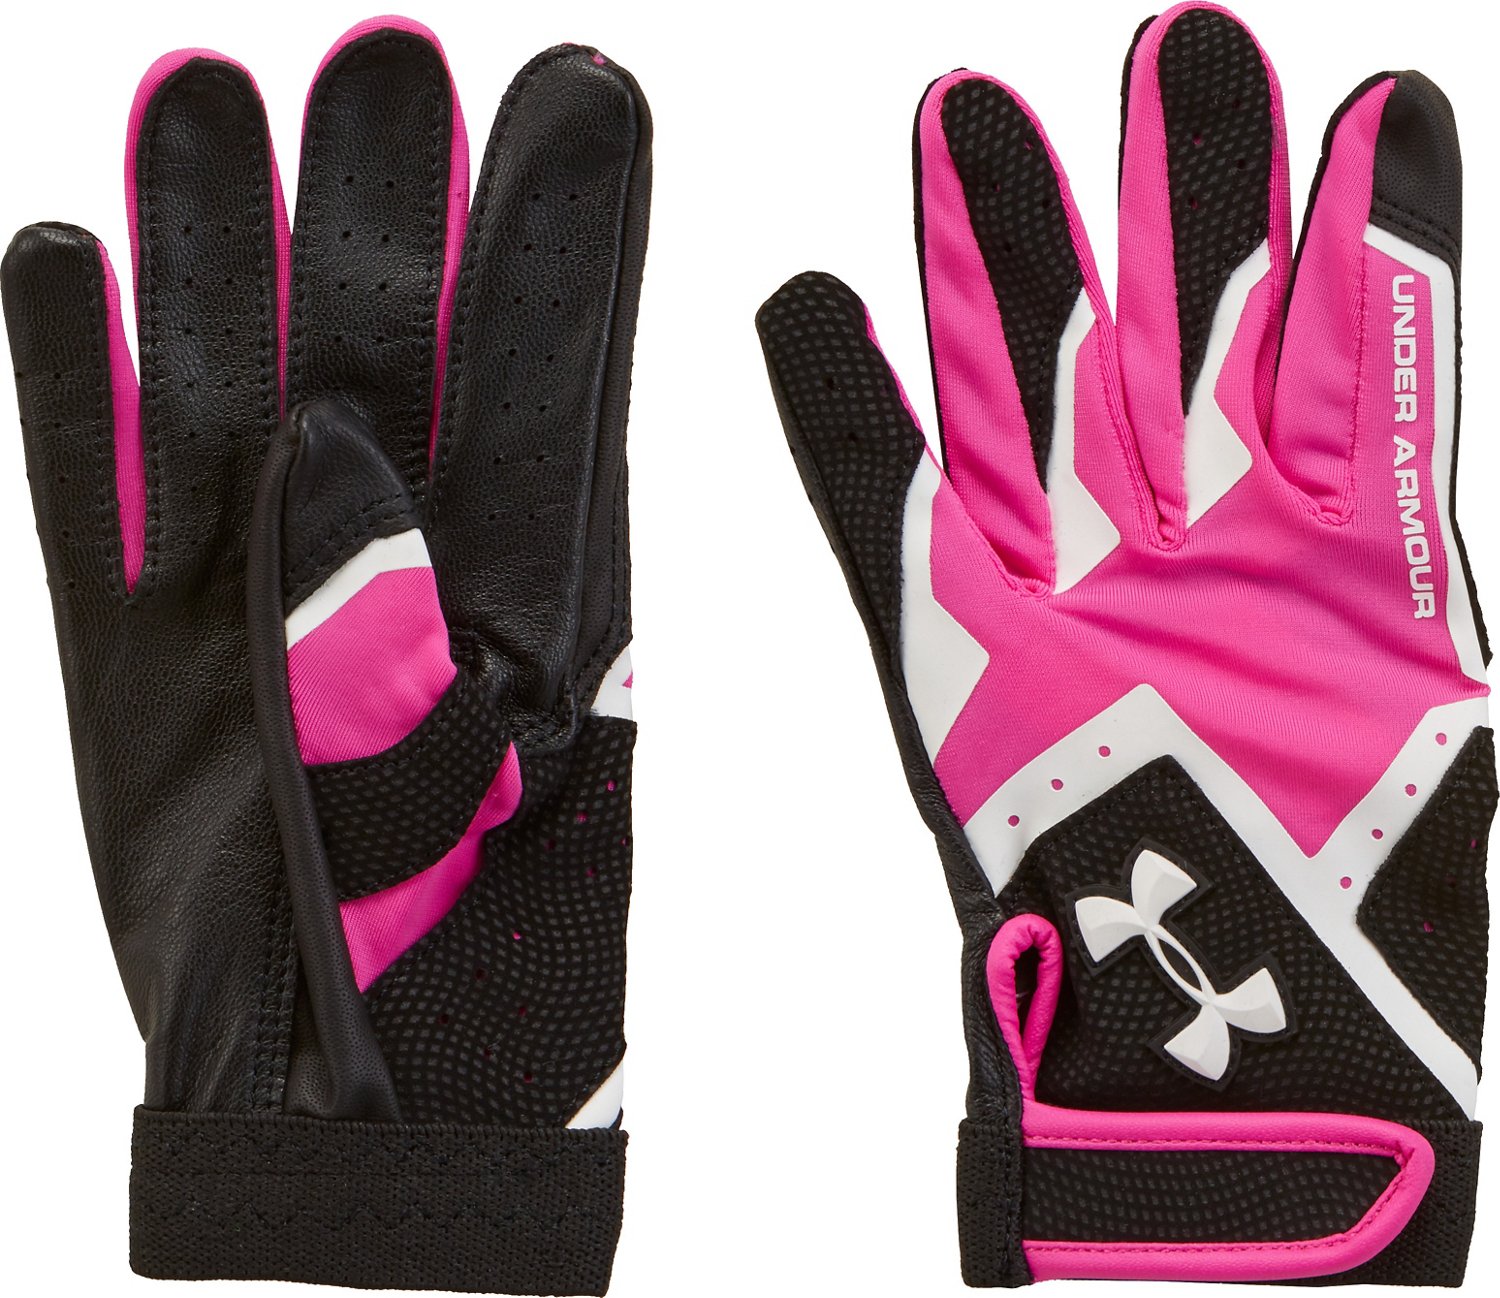 under armor youth football gloves